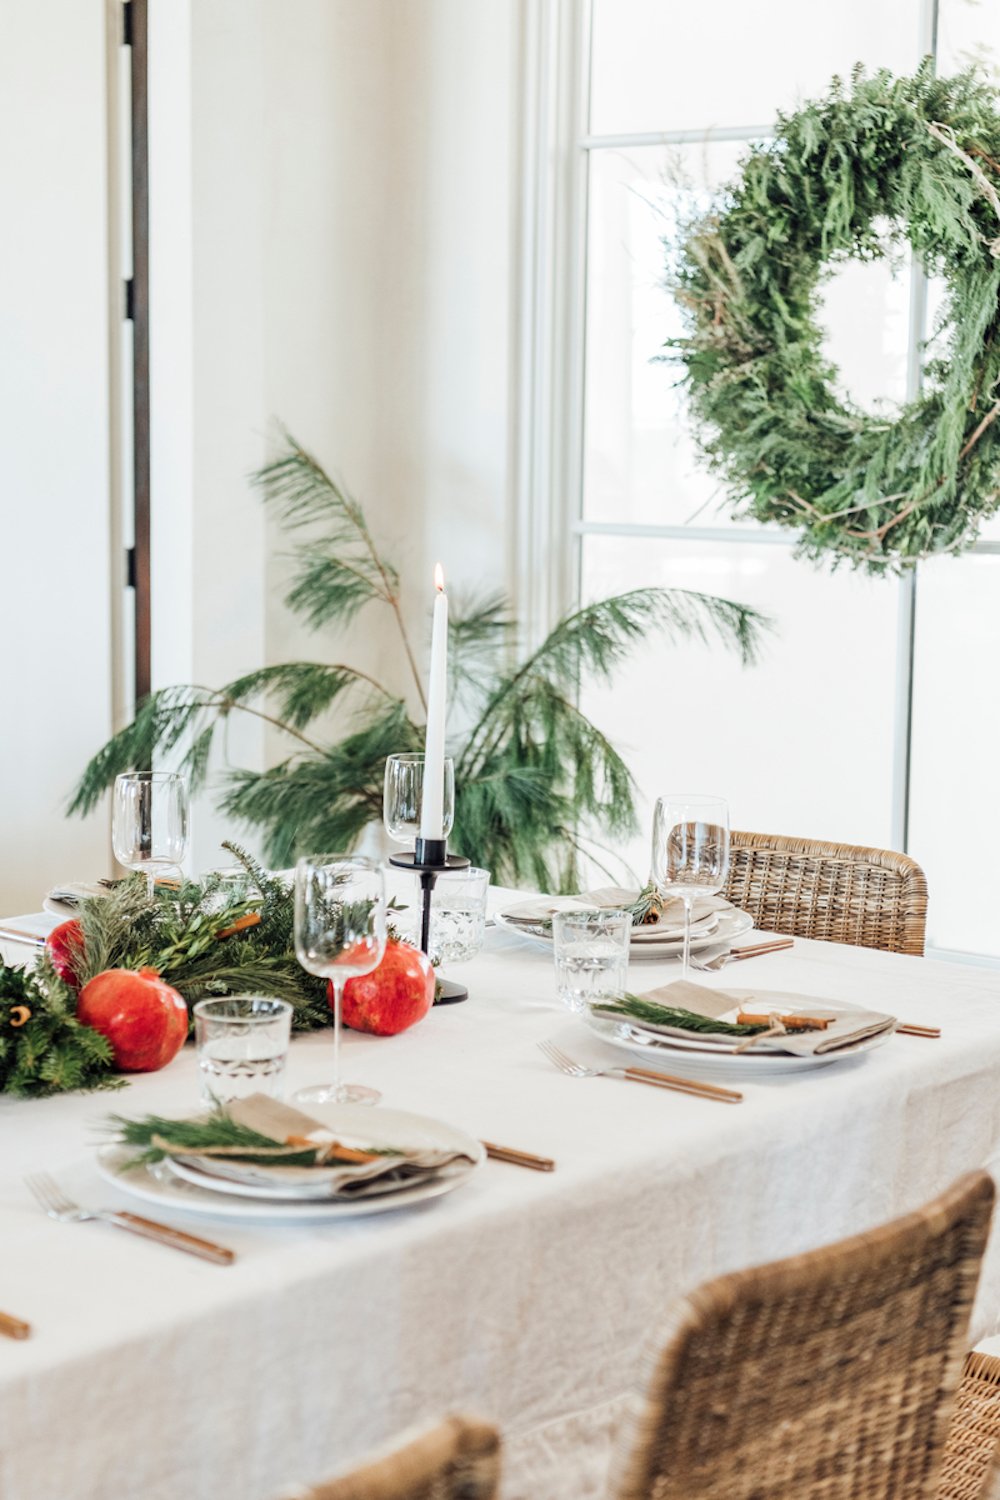 Modern holiday table setting with white tablecloth, modern drinking and wine glasses, white plates, gray linen napkins, and evergreen pine centerpiece with pomegranates.